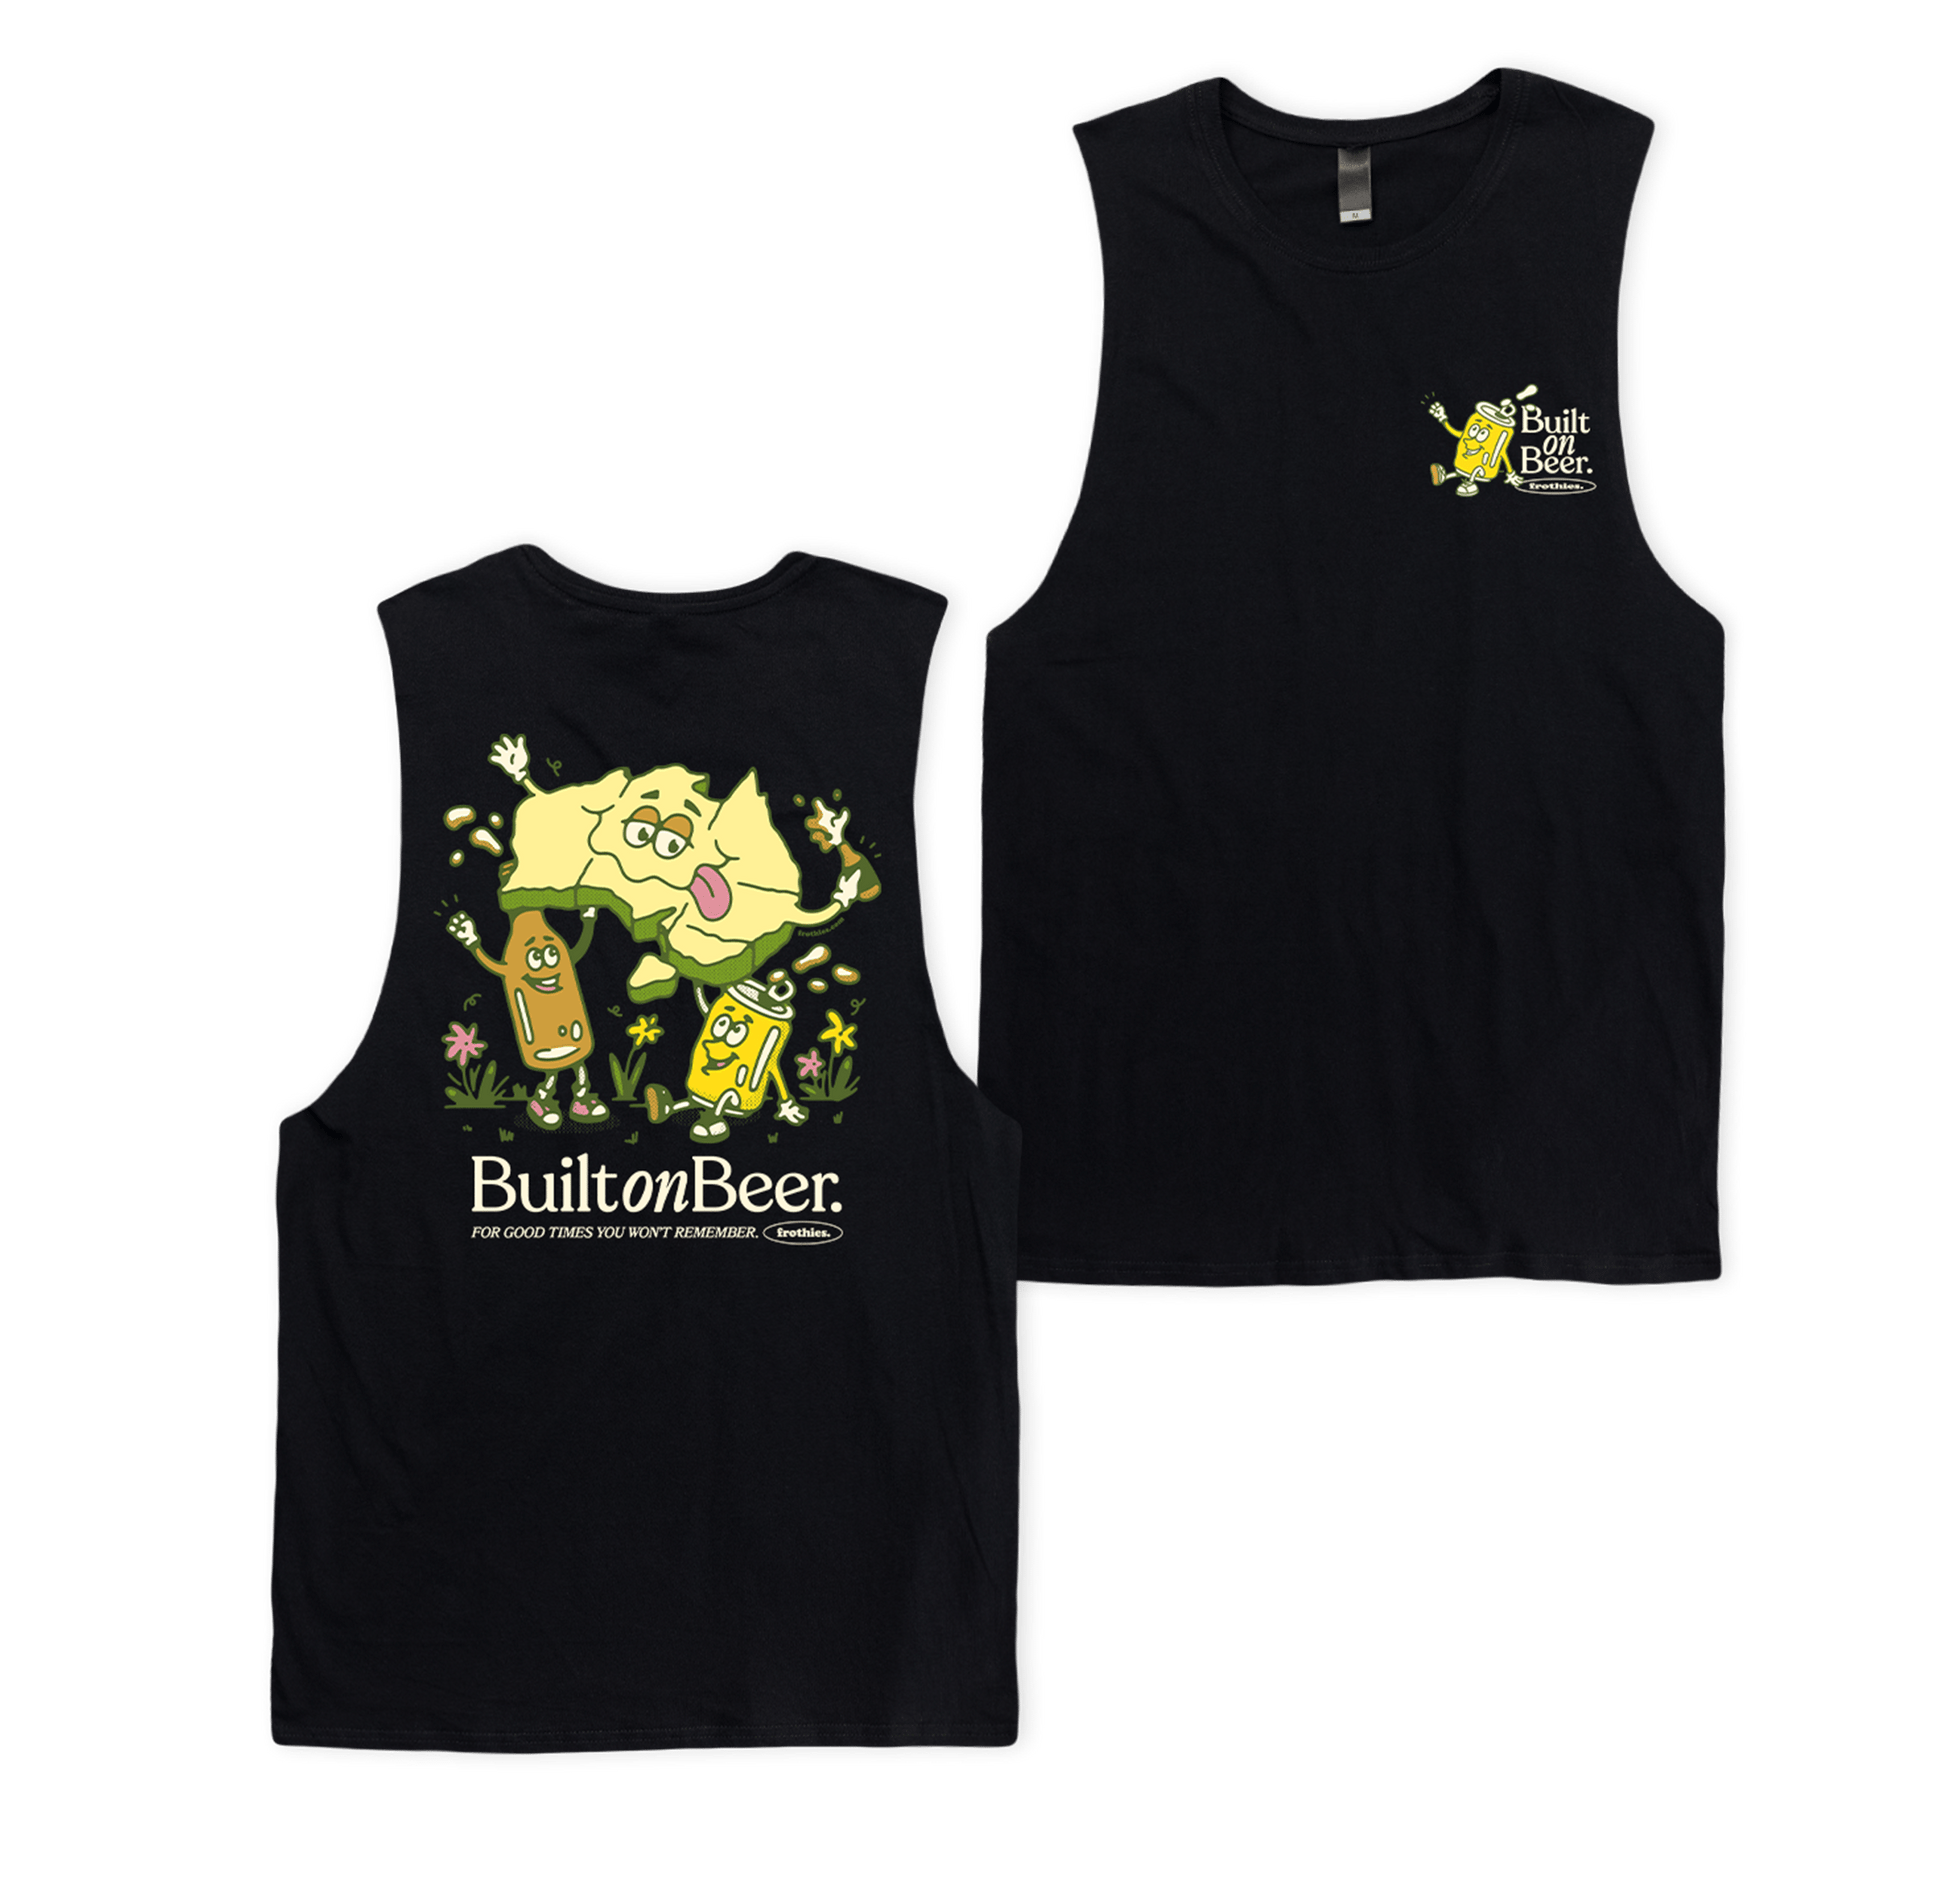 Built on Beer Muscle Tee Muscle Tanks Frothies